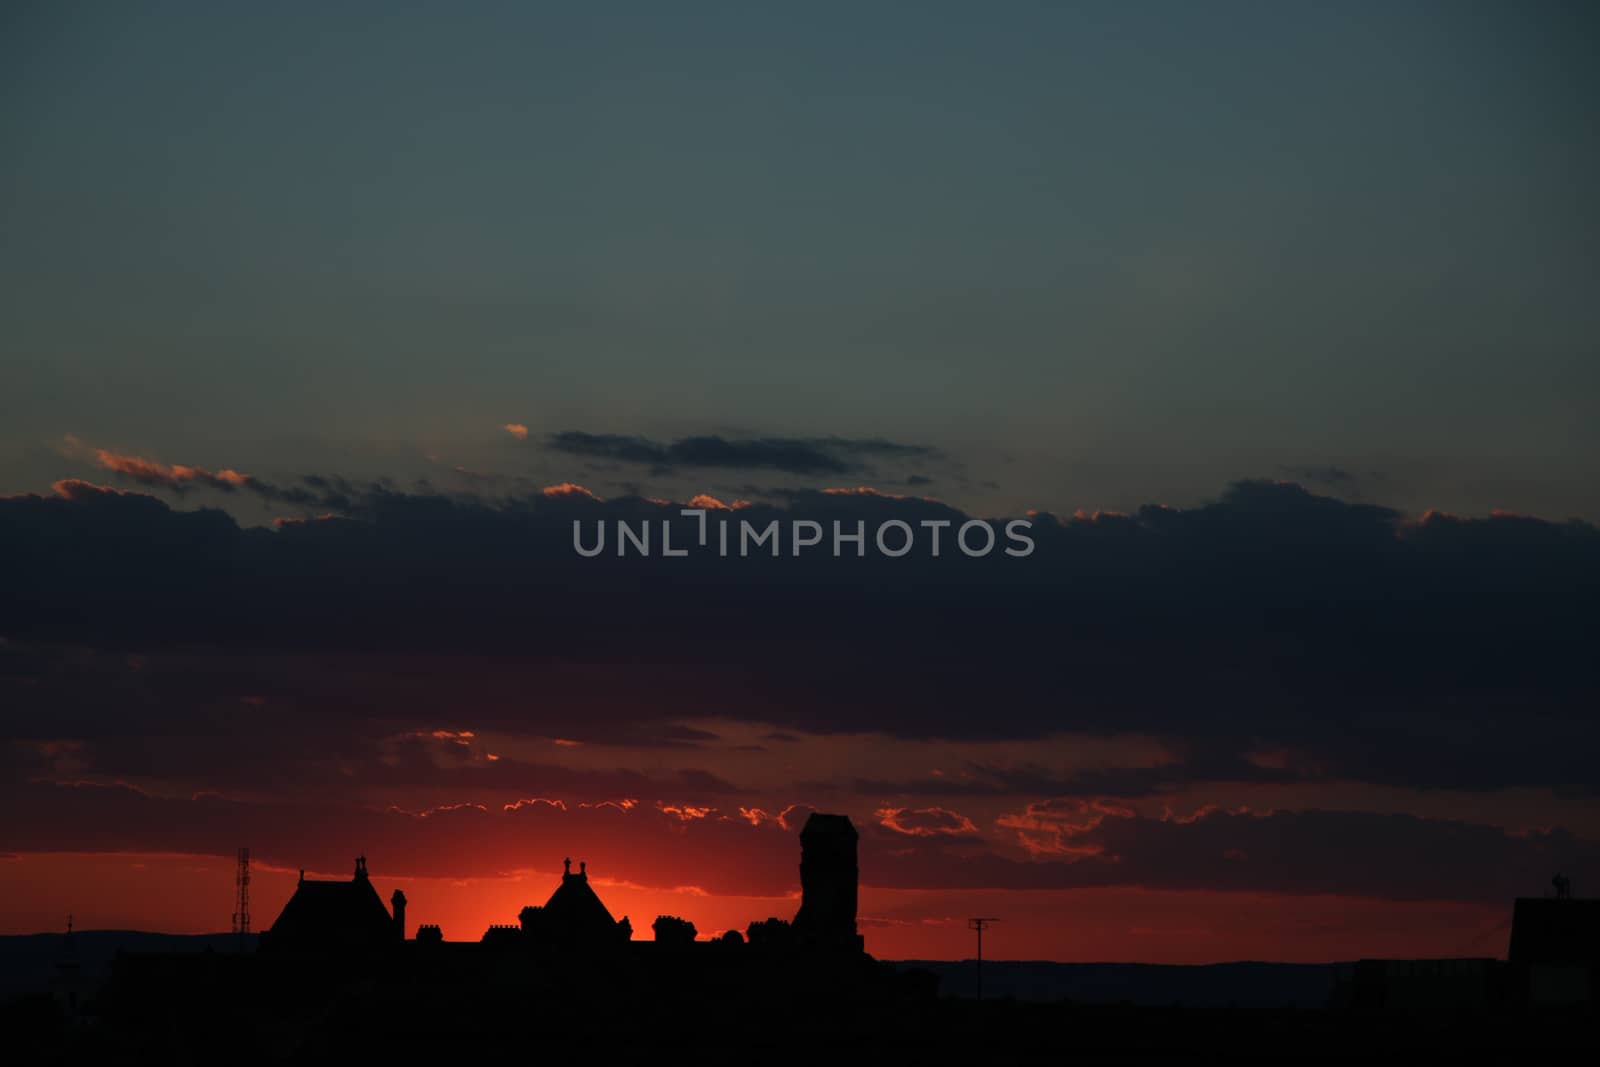 Concept of calm and serenity. Colorful and cloudy sunset in the background. Sibiu, Romania, old medieval town in eastern central Europe. Fiery red sunset with old building silhouette.